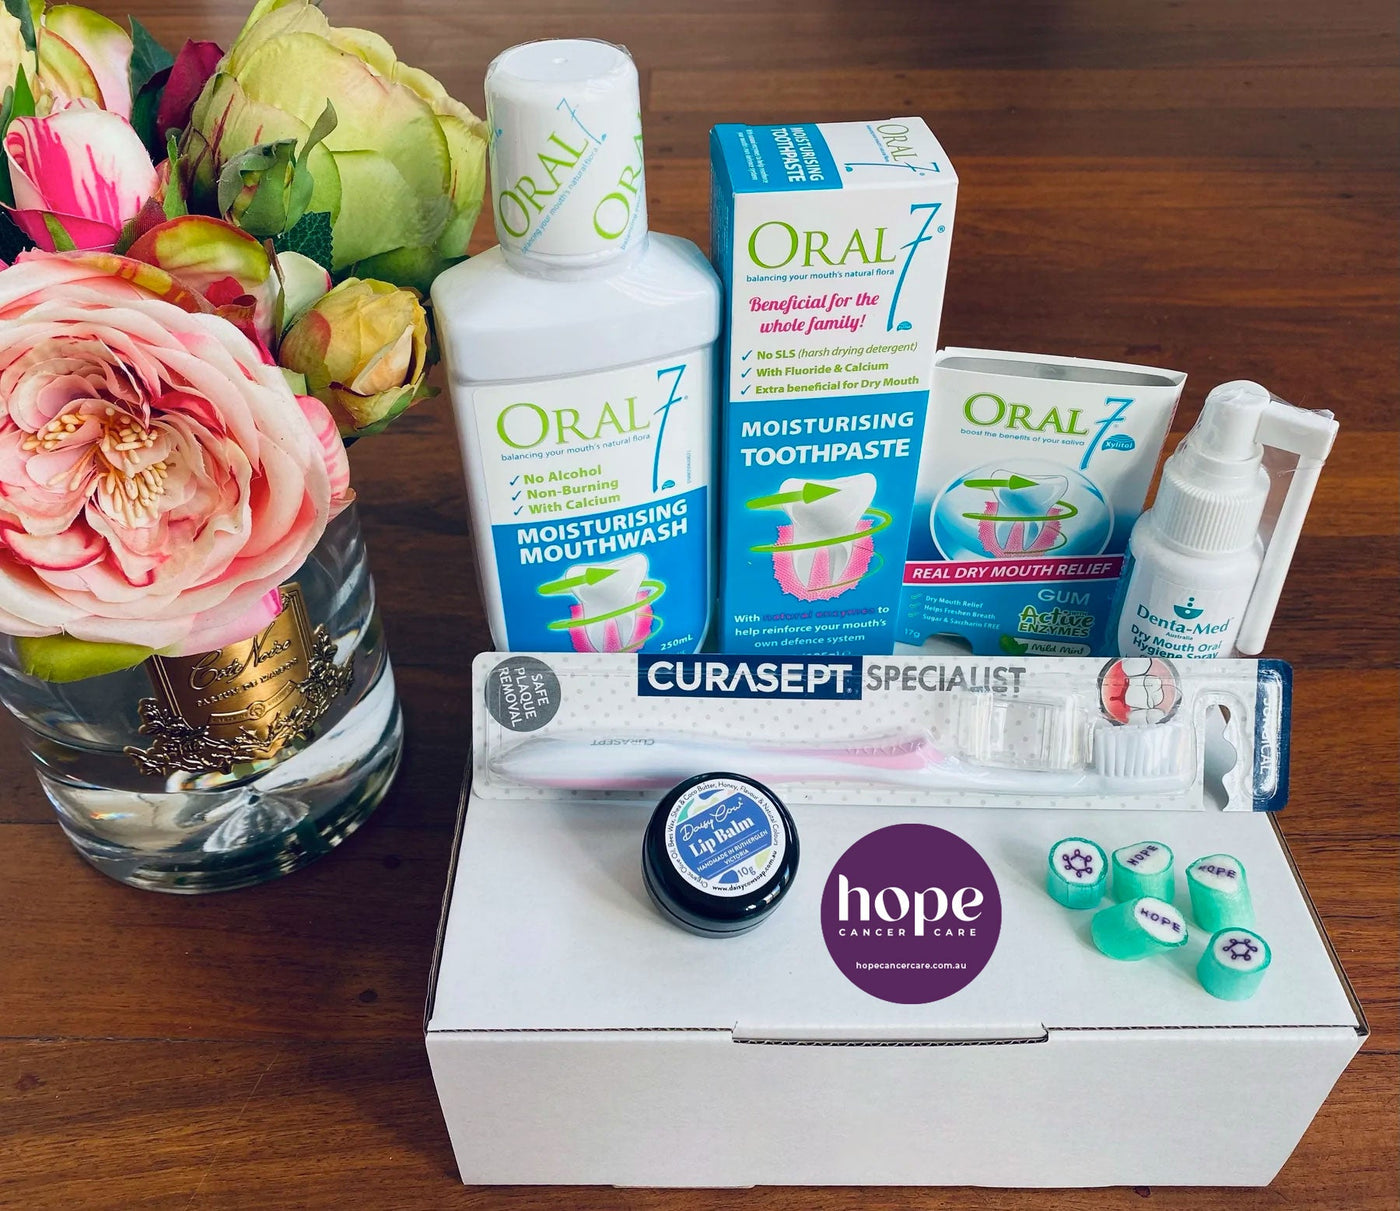 The HOPE Mouth & Lips Care Pack